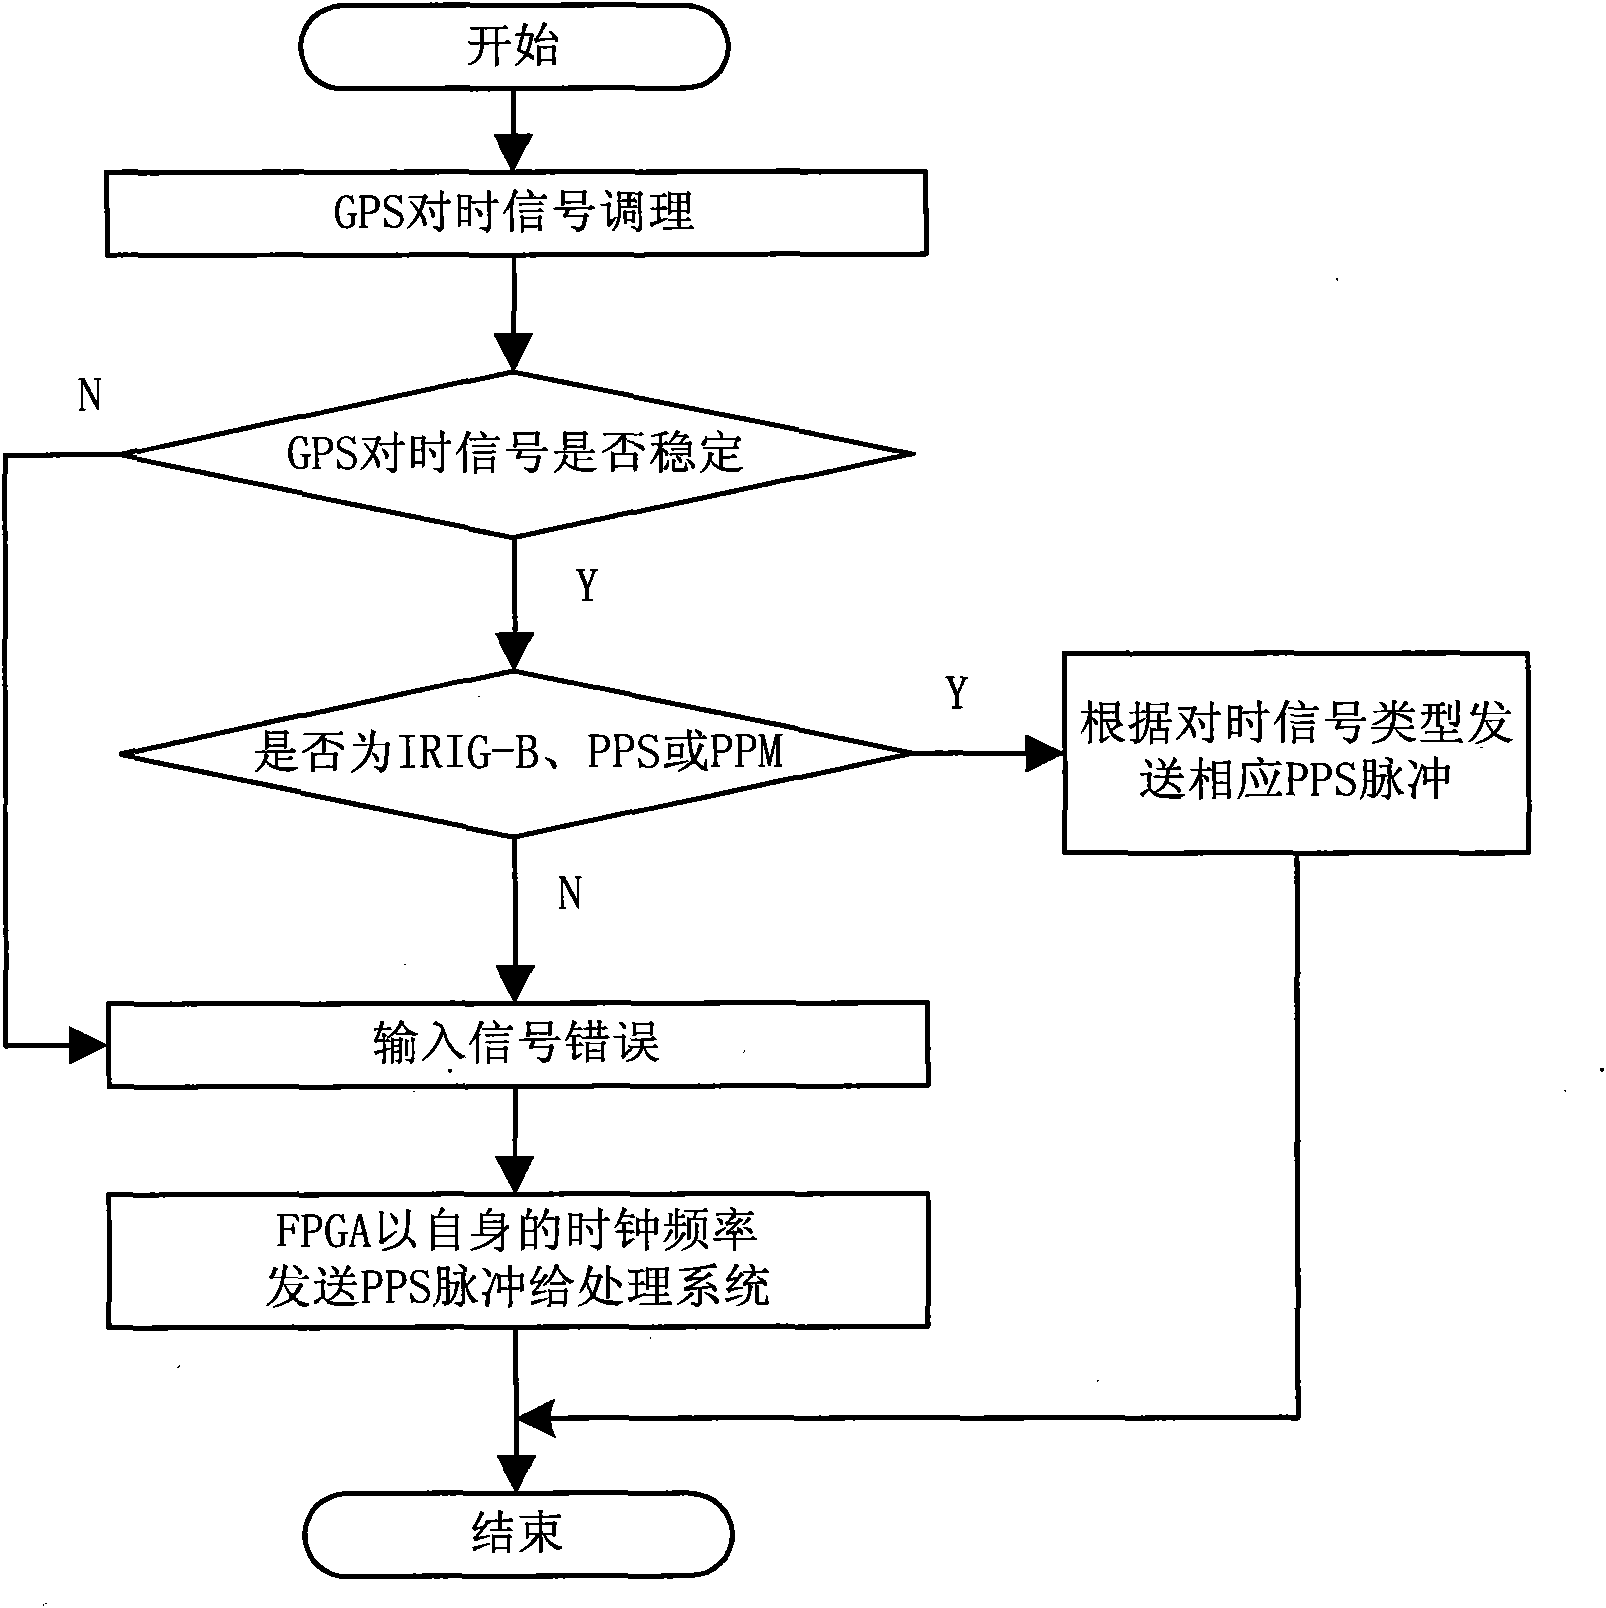 Time synchronizing method capable of recognizing GPS input signals in self-adapting manner